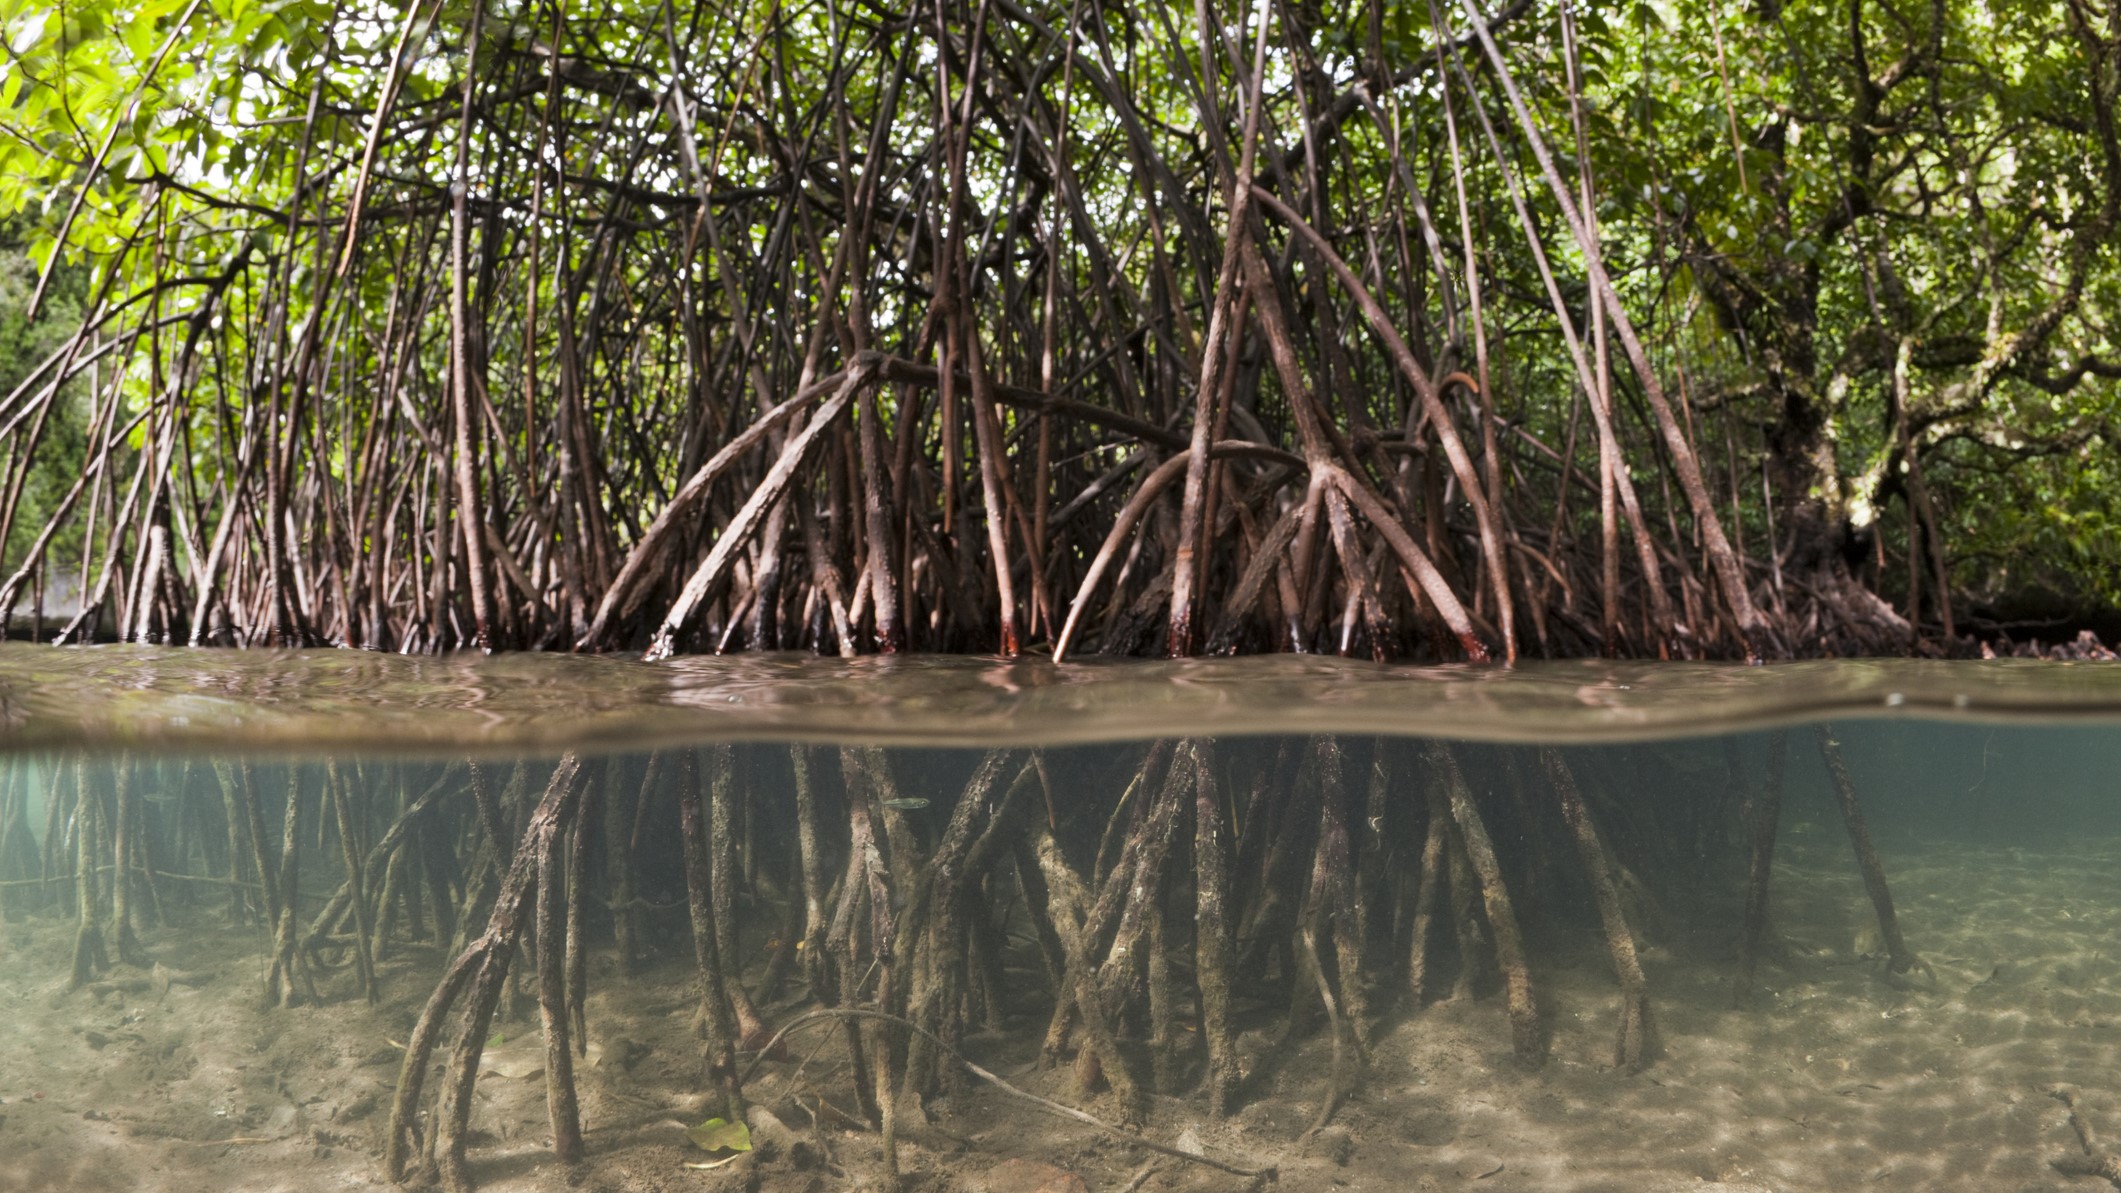 Mangrove trees with roots extending out above the water.